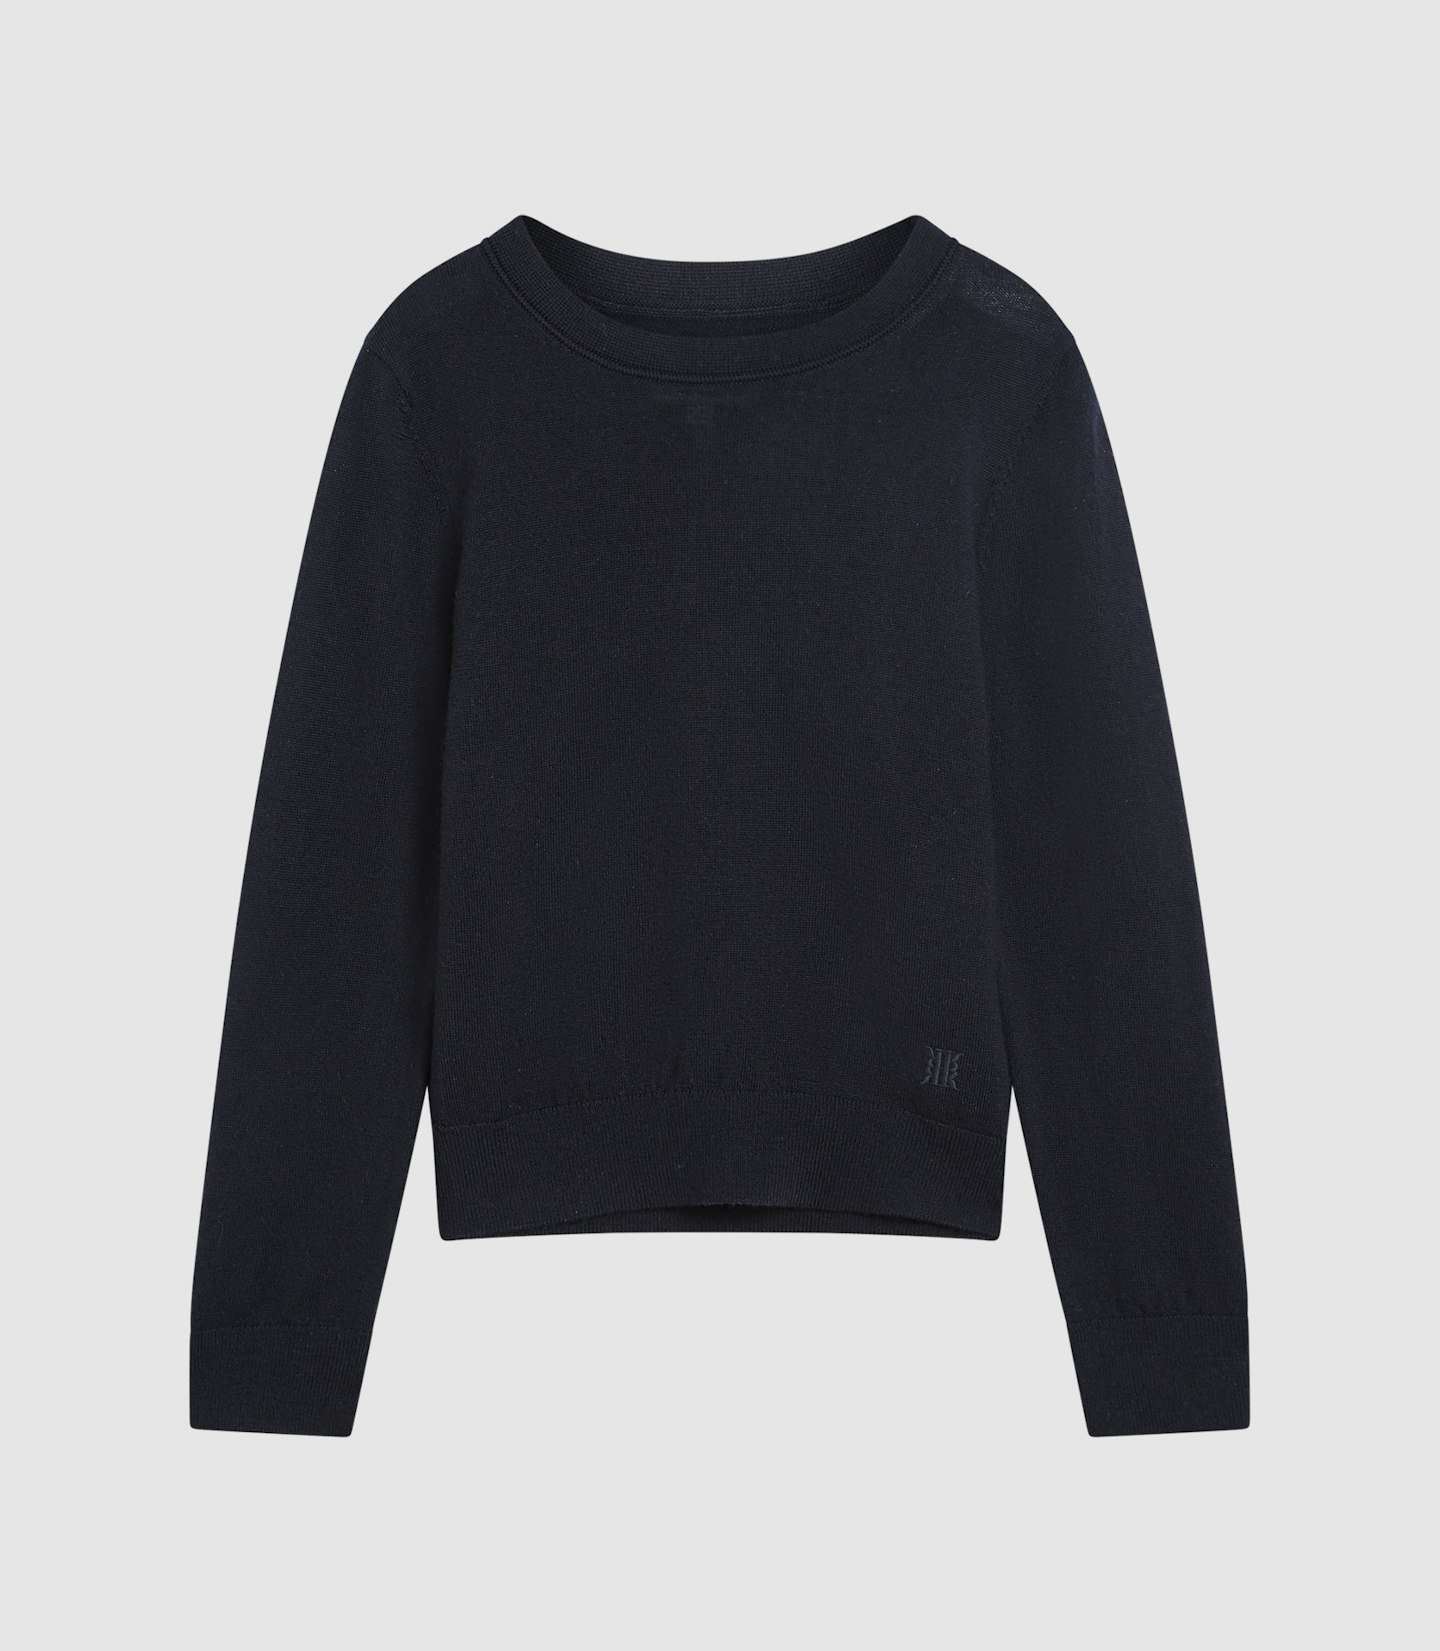 Crew-Neck Knitted Jumper, £32